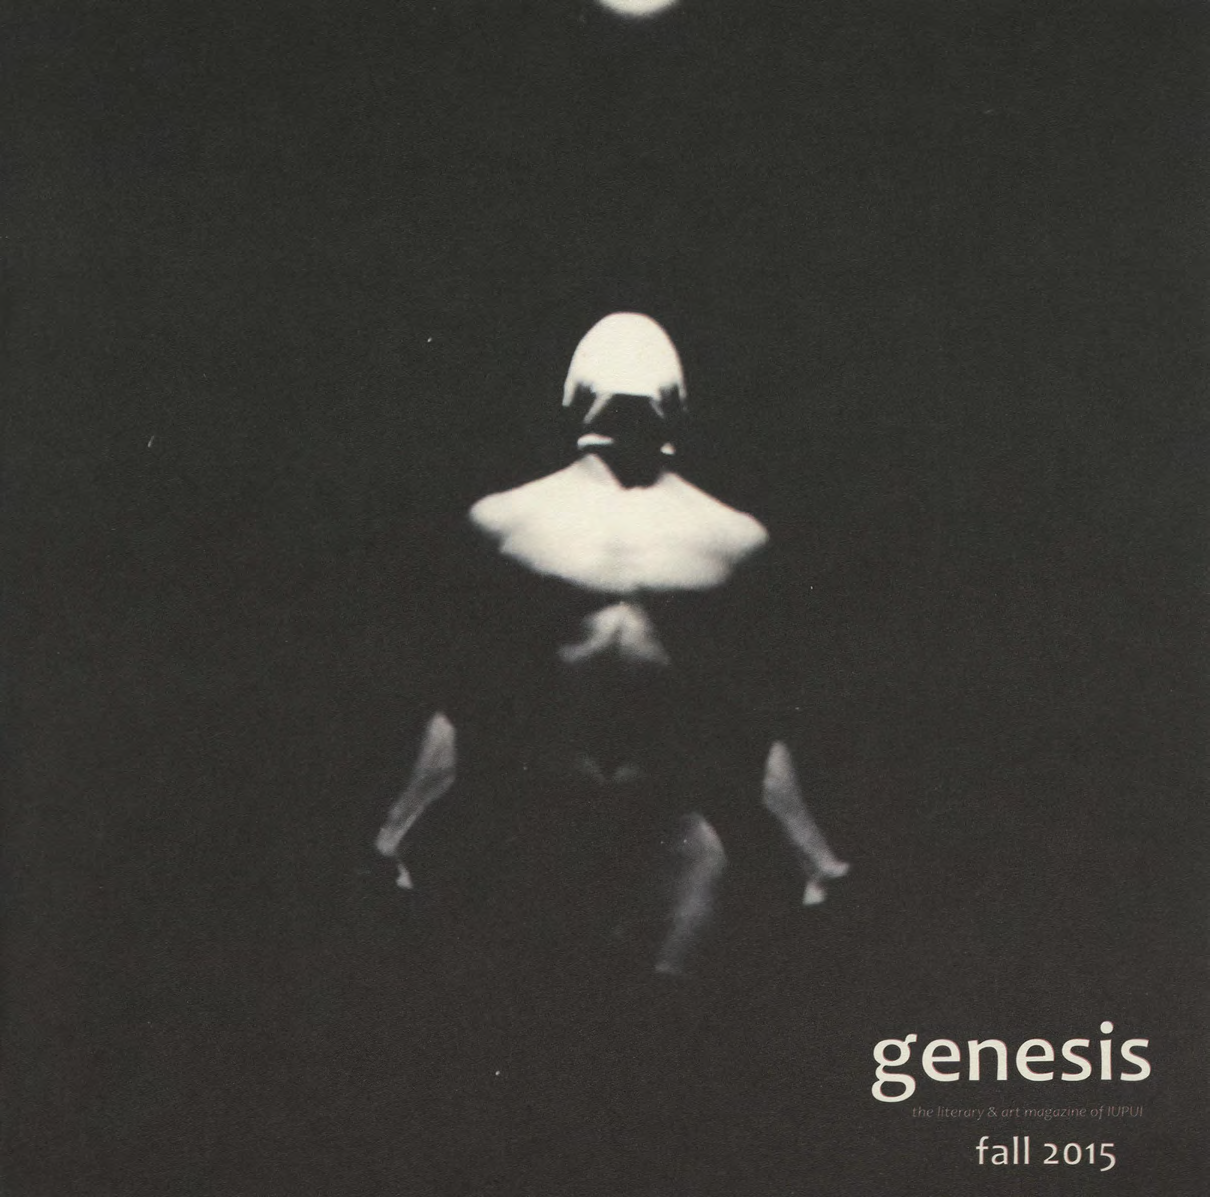 gensis fall 2015 cover